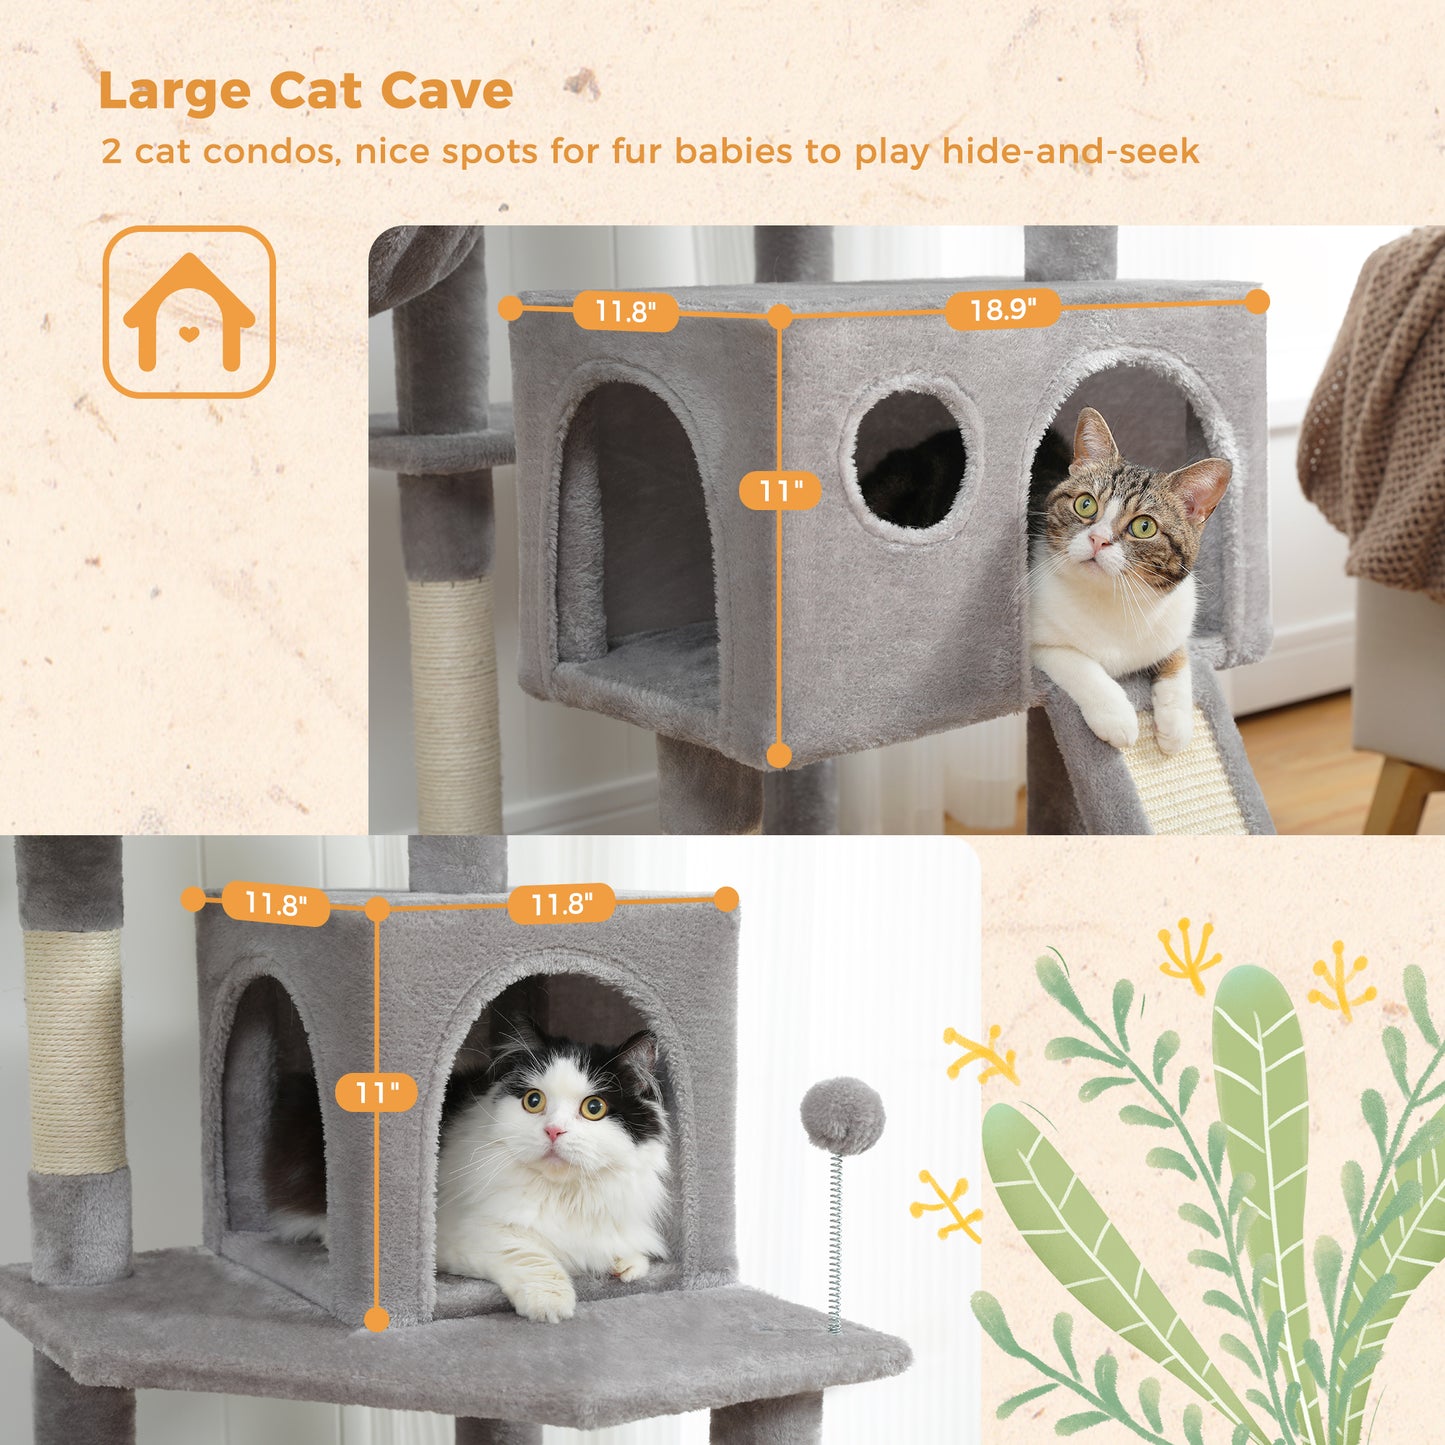 PAWZ Road Cat Tree Scratching Post Tree Large Cat Climb House Furniture with 2 Condo 162cm Grey